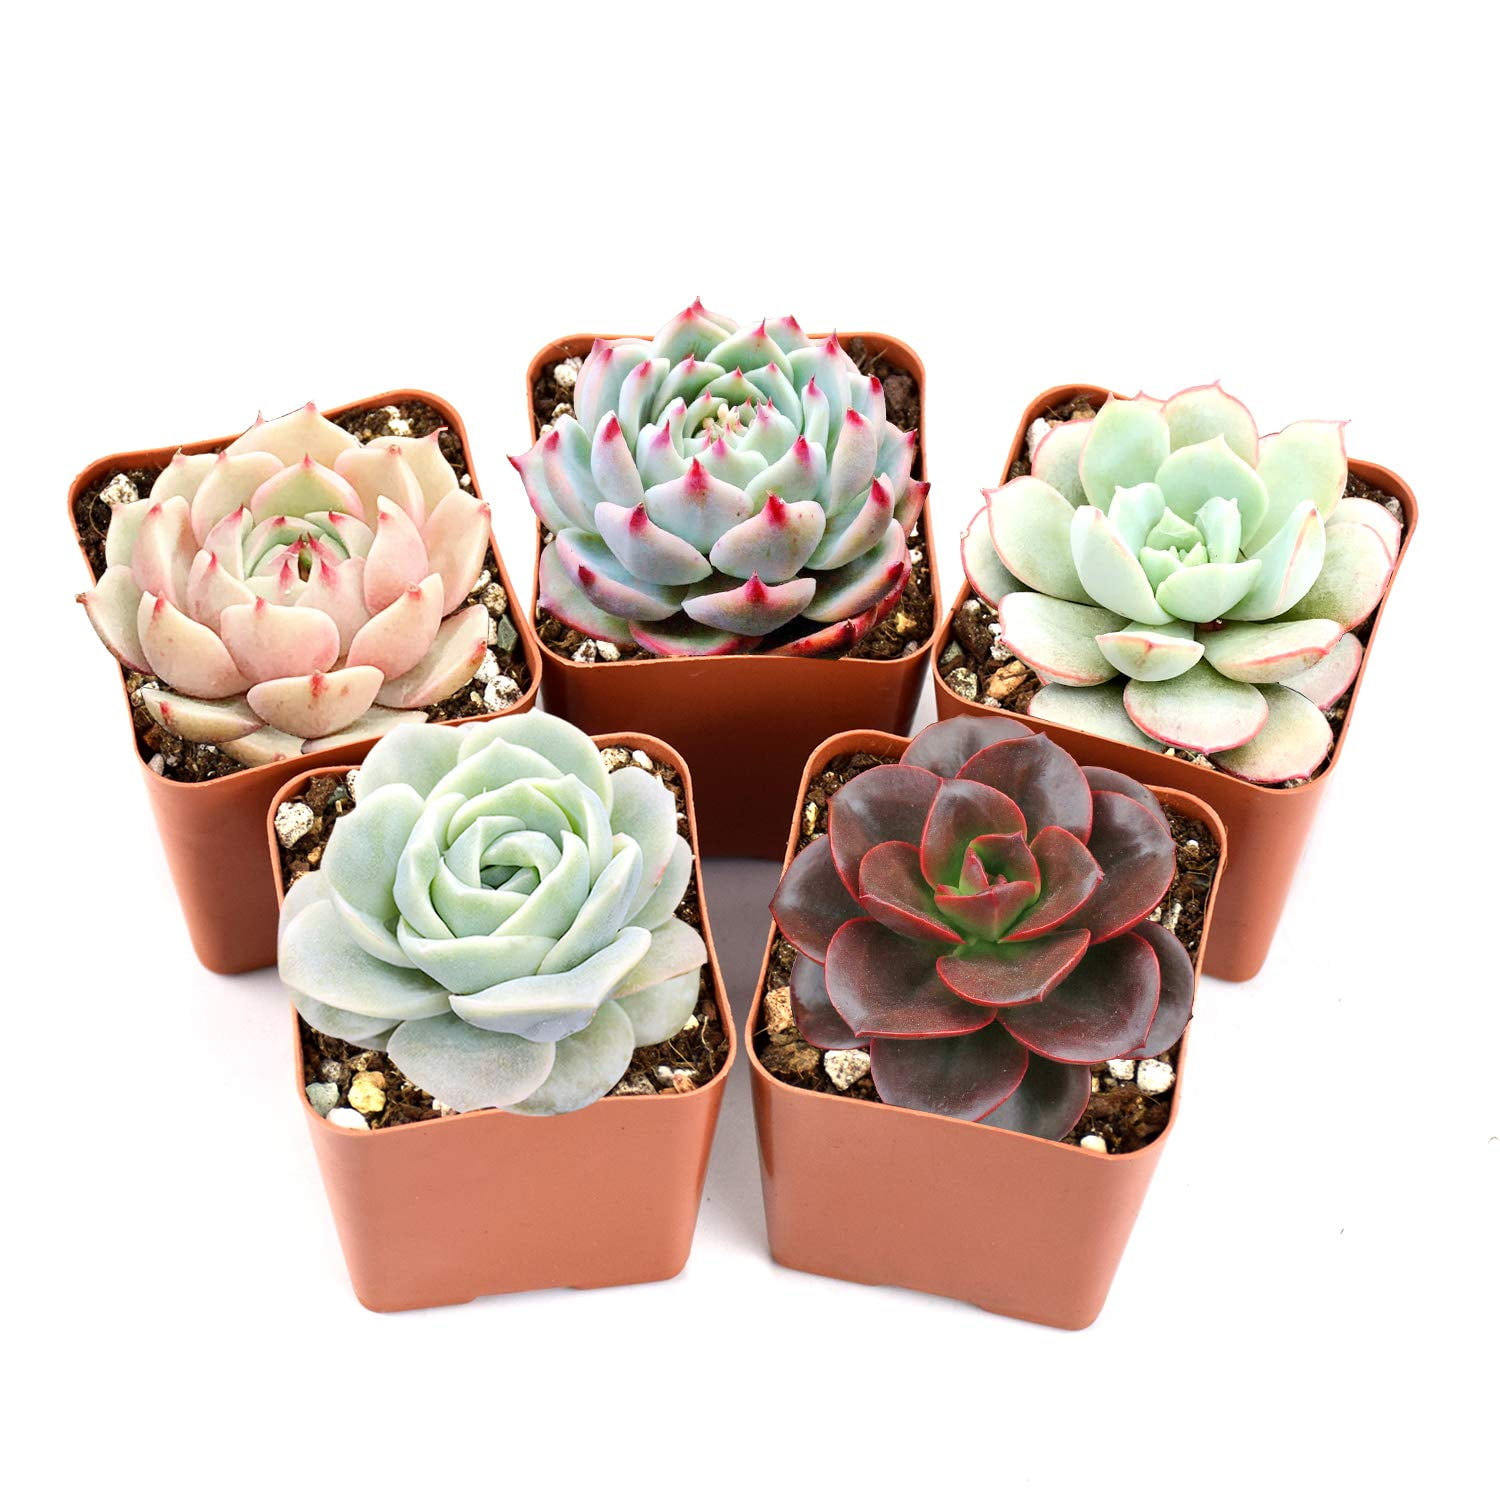 Living Succulents,Potted Flowers,Rare Succulents,Indoor Bonsai,Combined Green Plants,Cute Succulents,Cute Succulents,Wedding Decorations